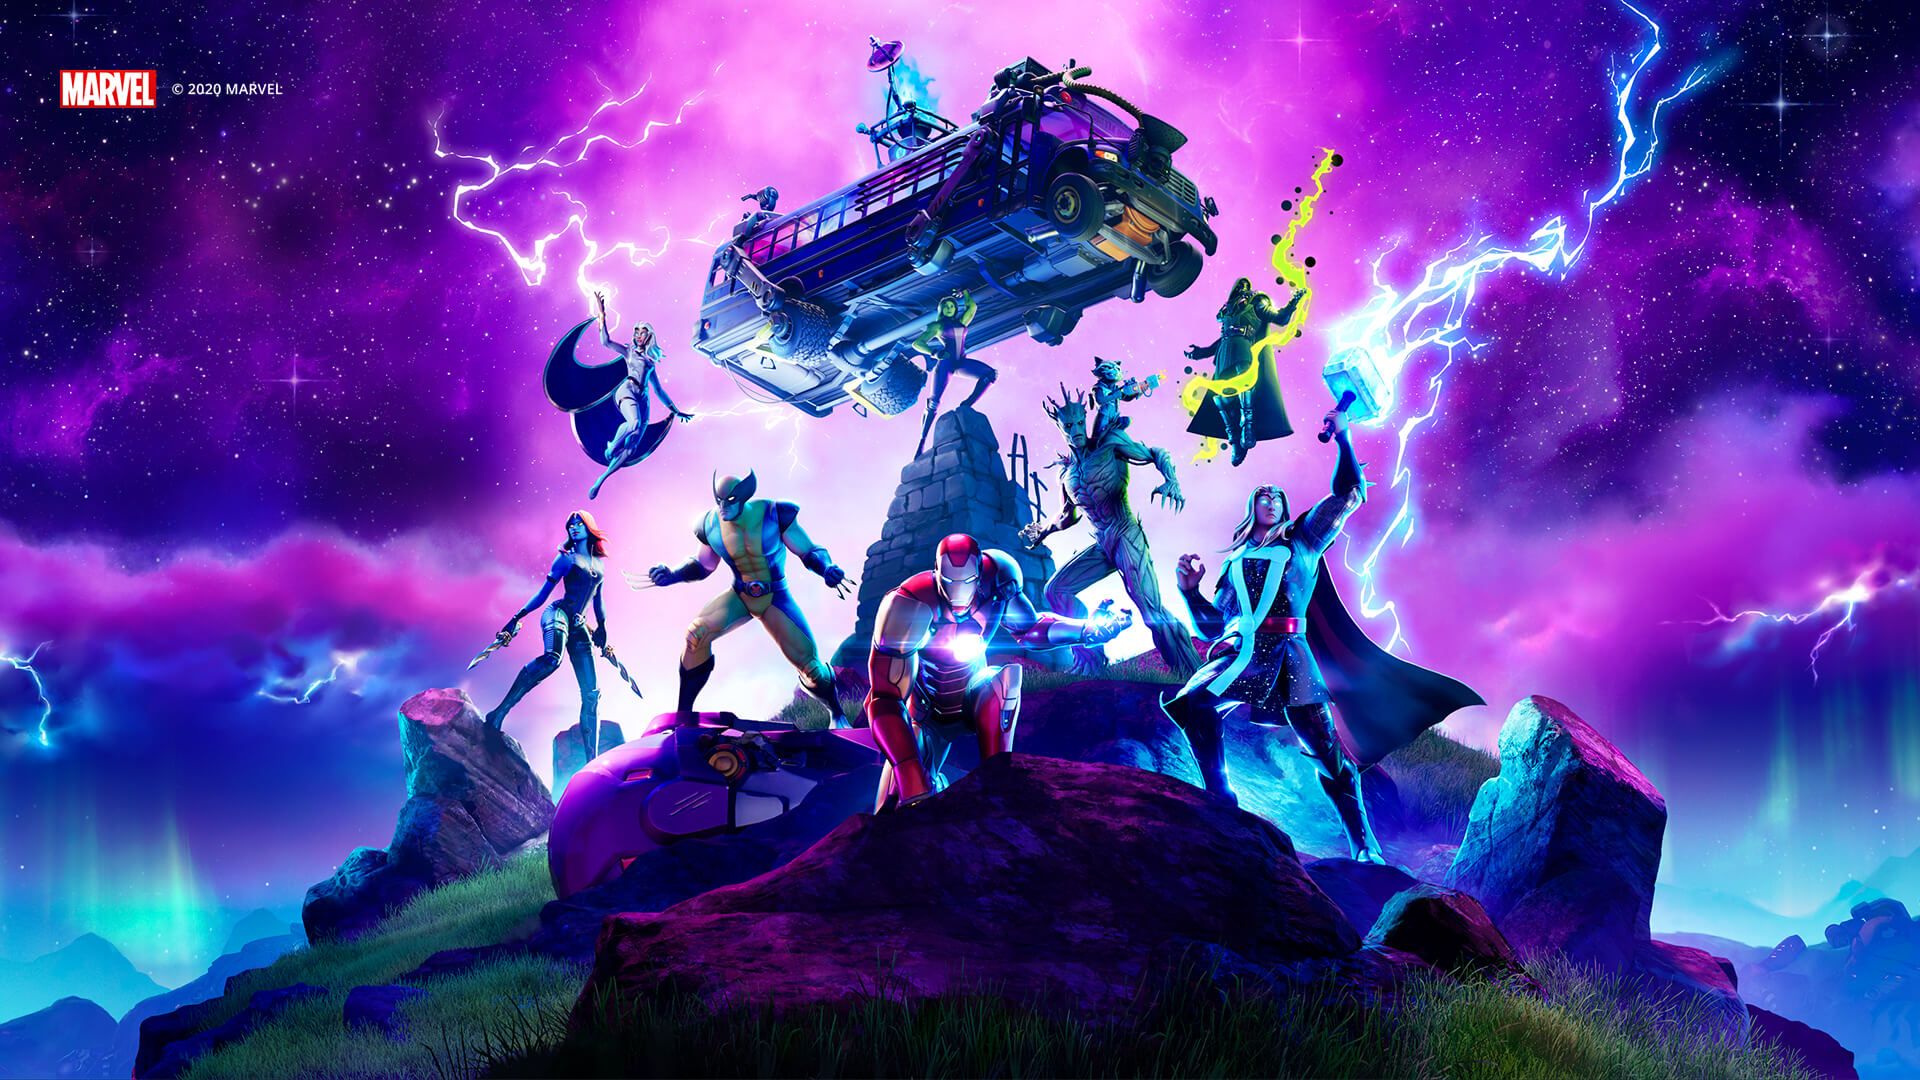 What's new in Fortnite Chapter 2 Season 4?